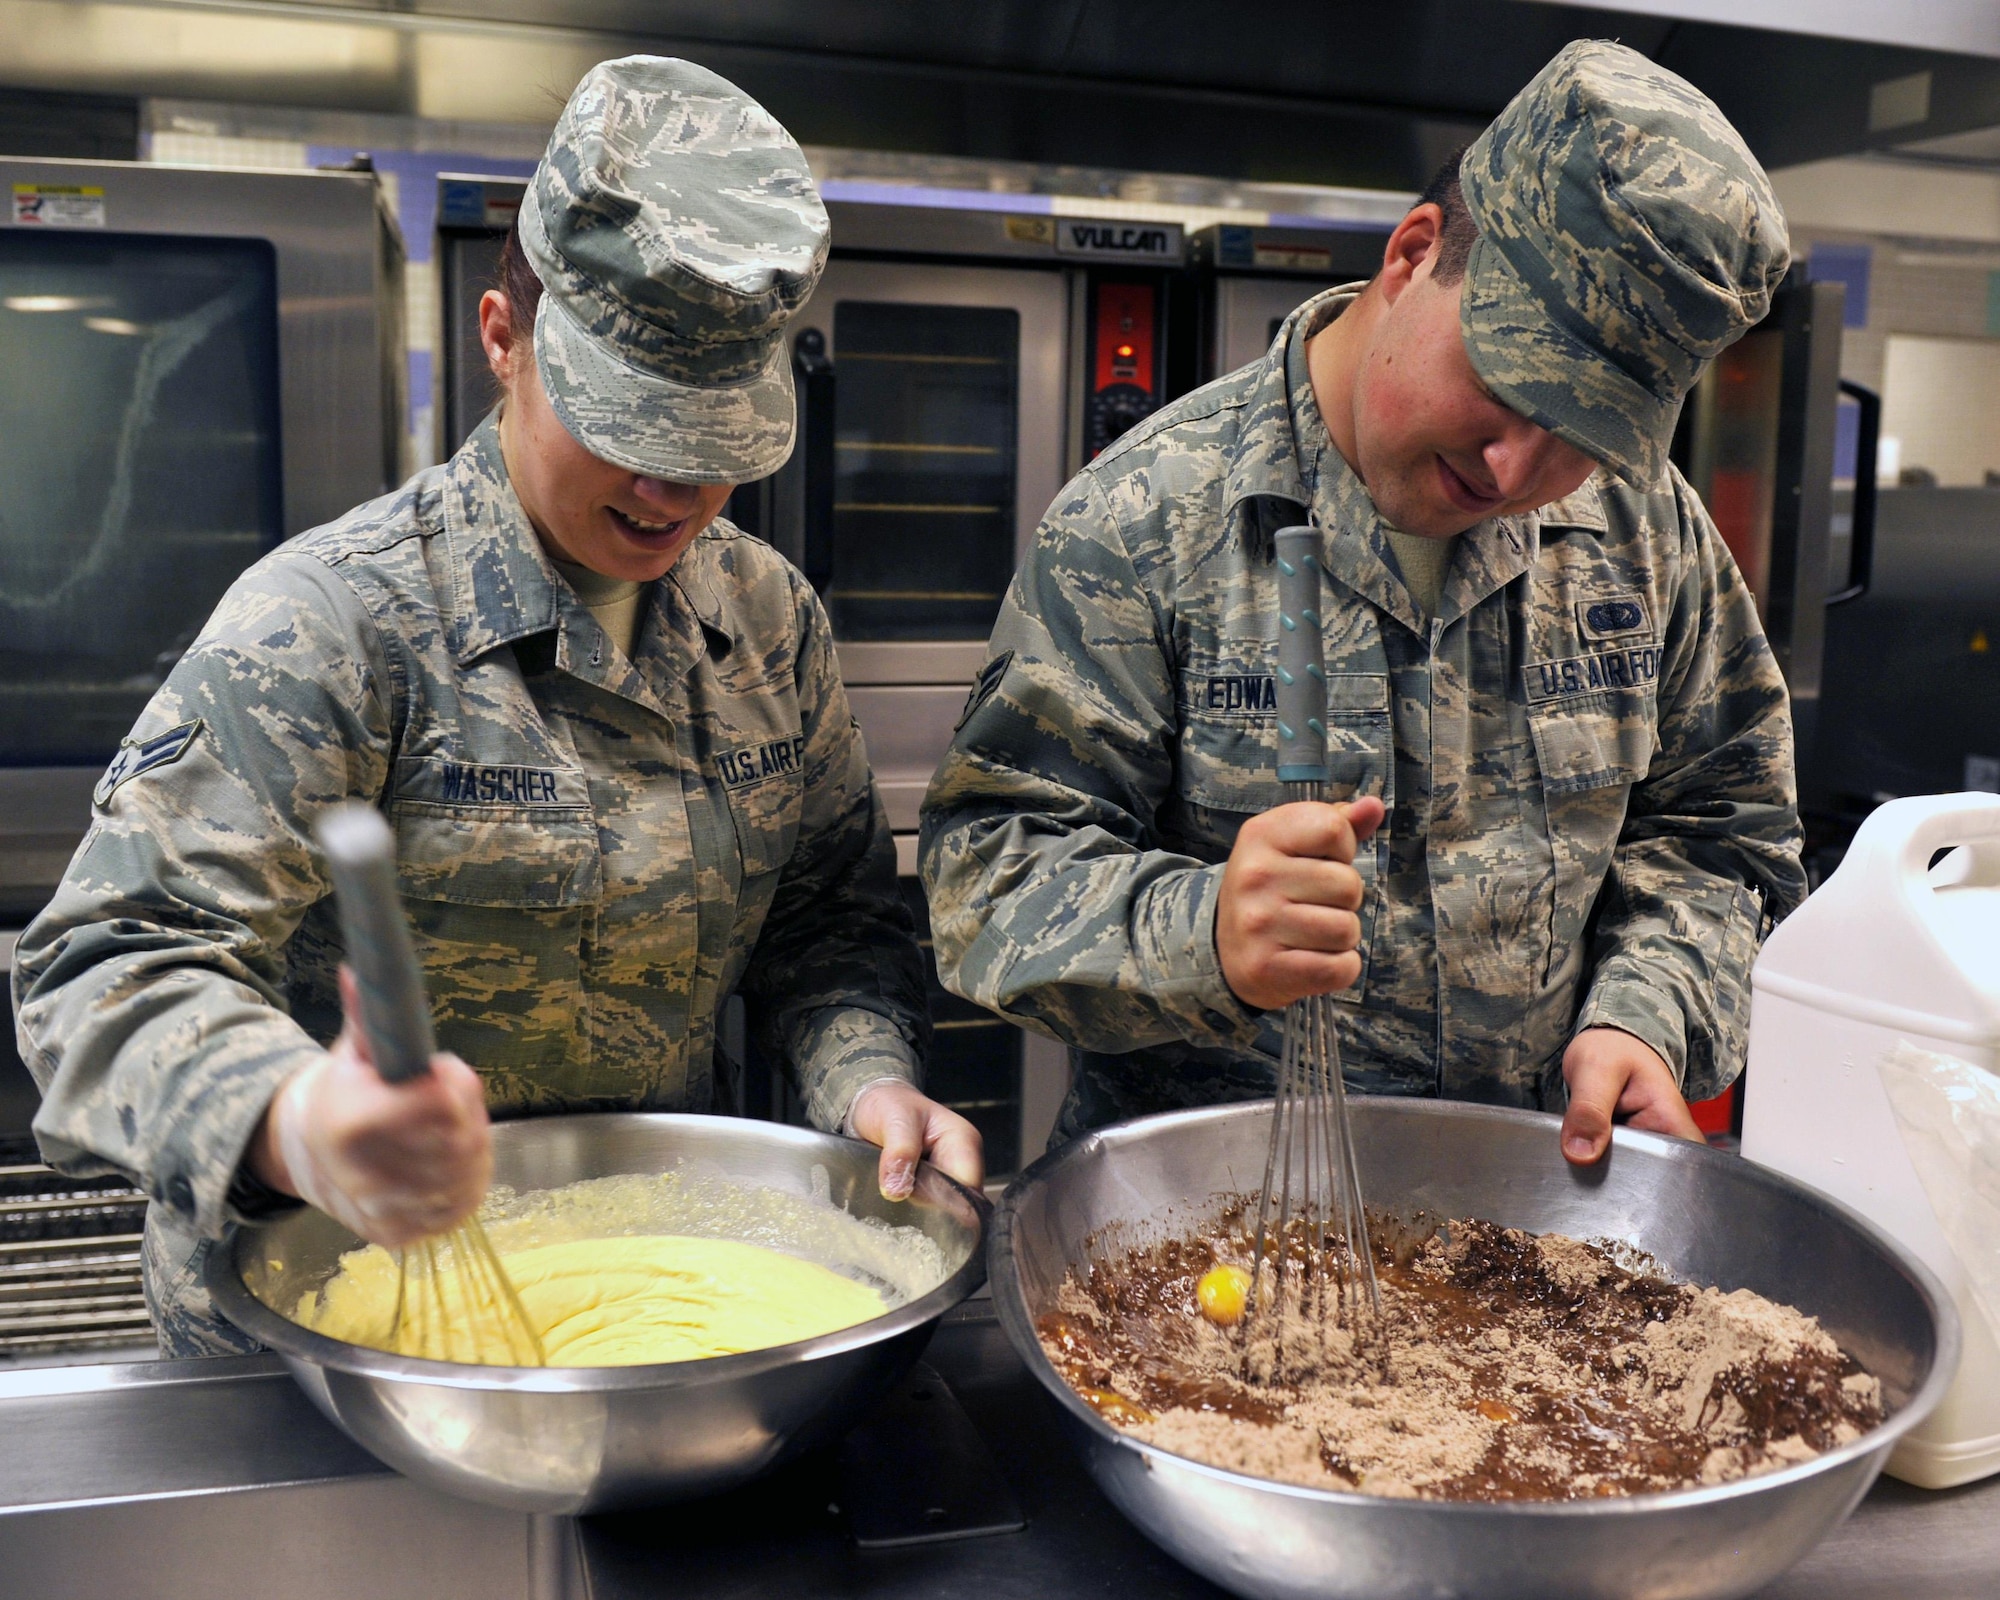 Airman 1st Class Jennifer Wascher, 56th Force Support Squadron food service journeyman, and Airman 1st Class Avery Edwards, 56th FSS food service journeyman, prep a midnight meal July 13, 2017 at Luke Air Force Base, Ariz. The Falcon Inn Dining Facility and the Ray V. Hensman Dining Facility sent five Airmen to receive culinary training at Birt’s Bistro and Bookstore Restaurant. (U.S. Air Force photo by Airman 1st Class Pedro Mota)